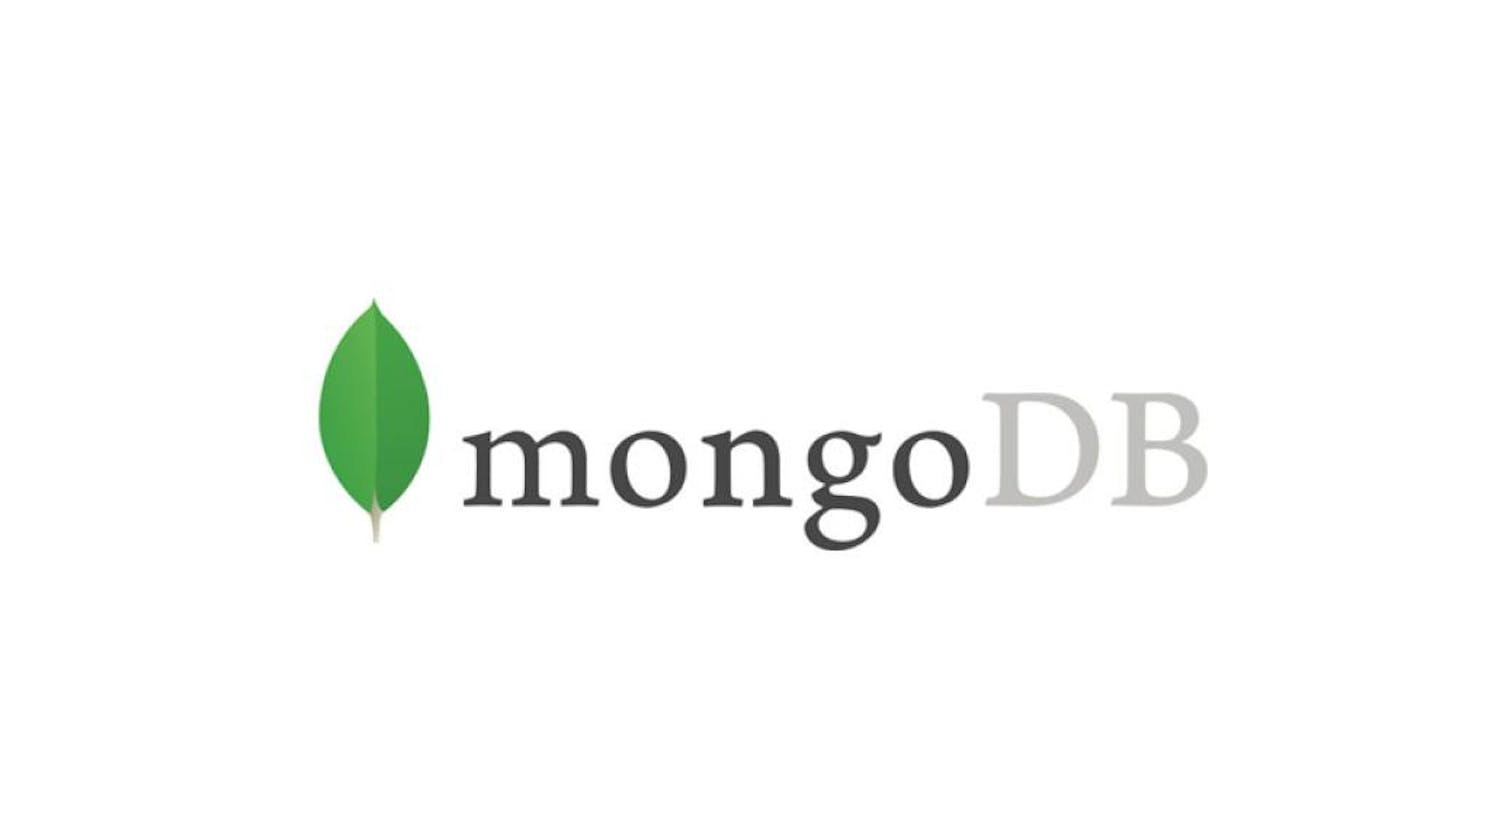 How to integrate MongoDb in your Next.js project